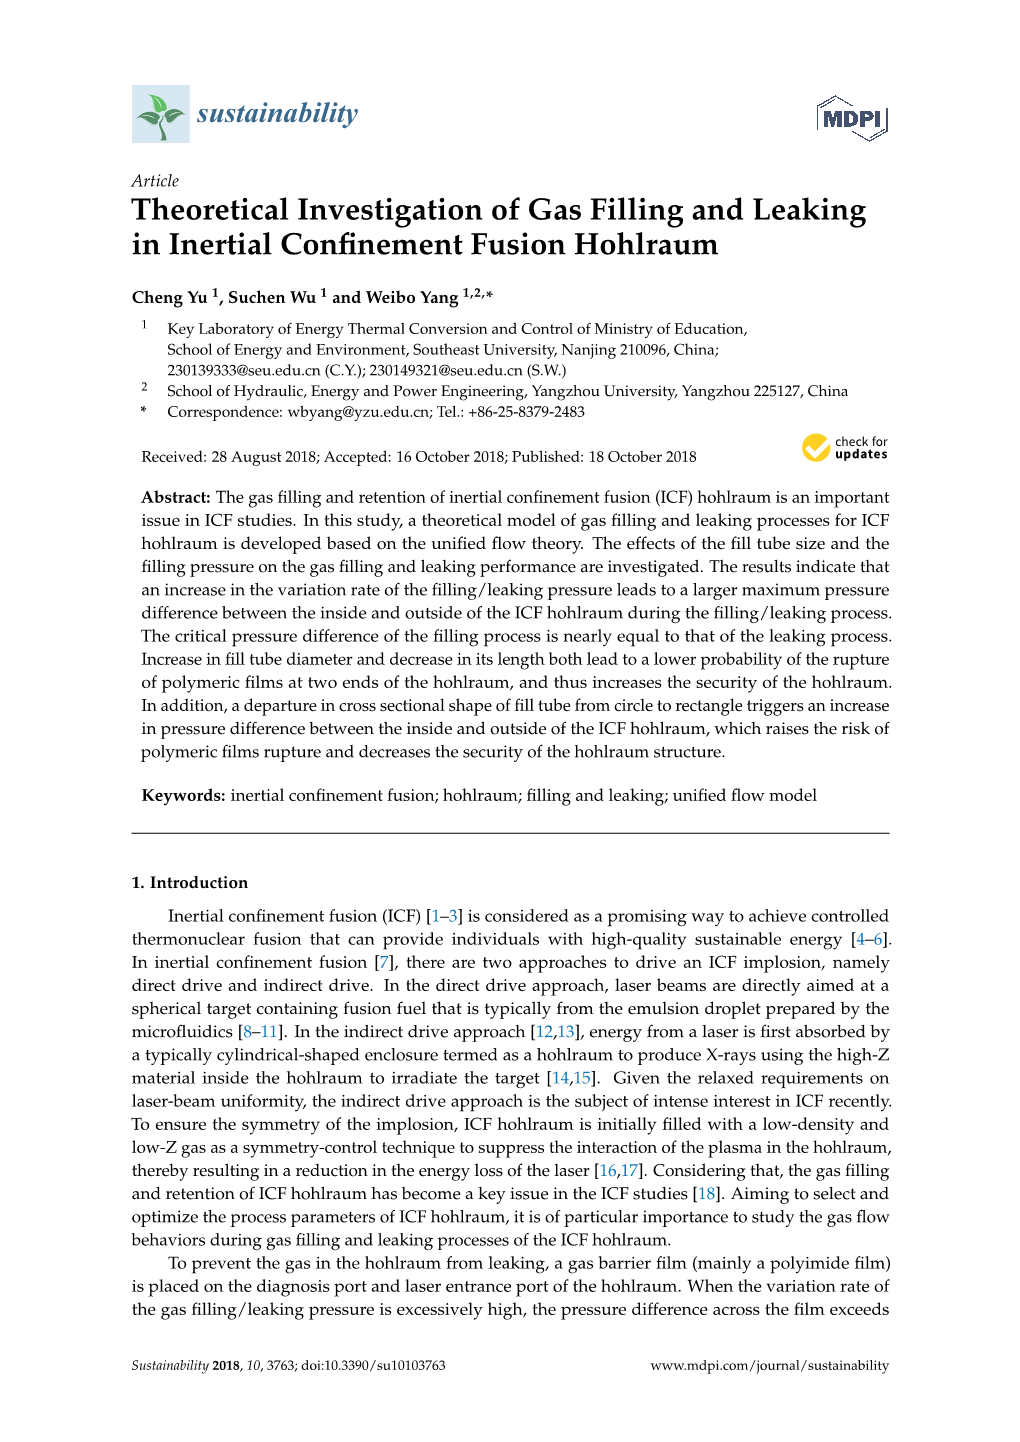 Theoretical Investigation of Gas Filling and Leaking in Inertial Conﬁnement Fusion Hohlraum